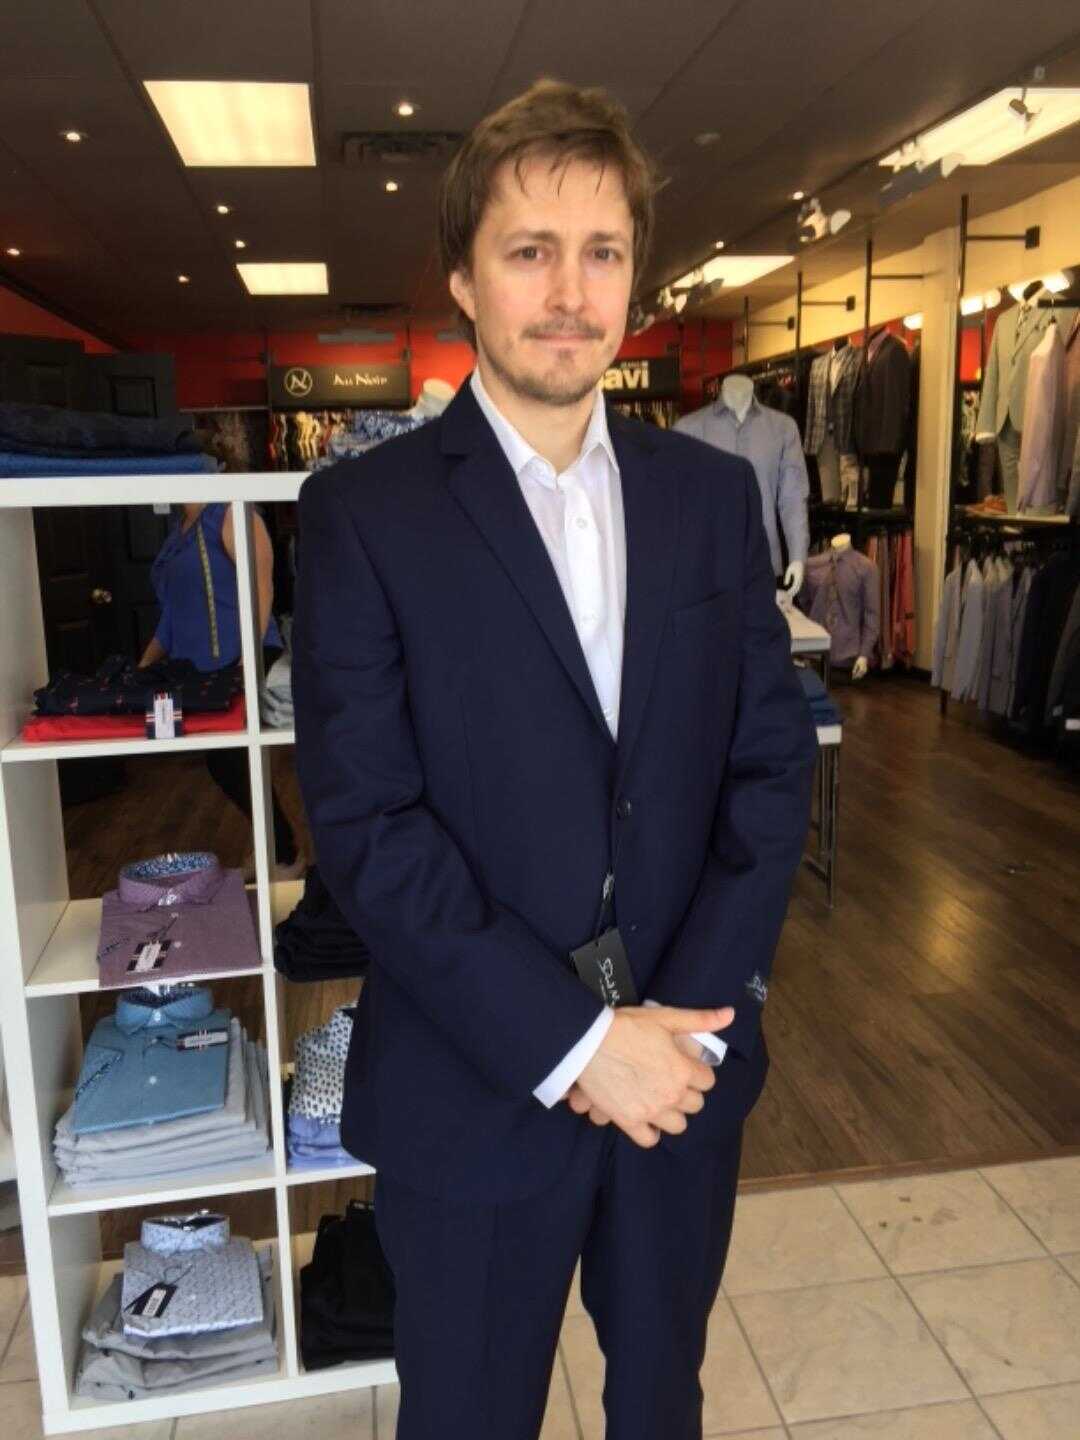 I don’t normally wear suits, but when I do...